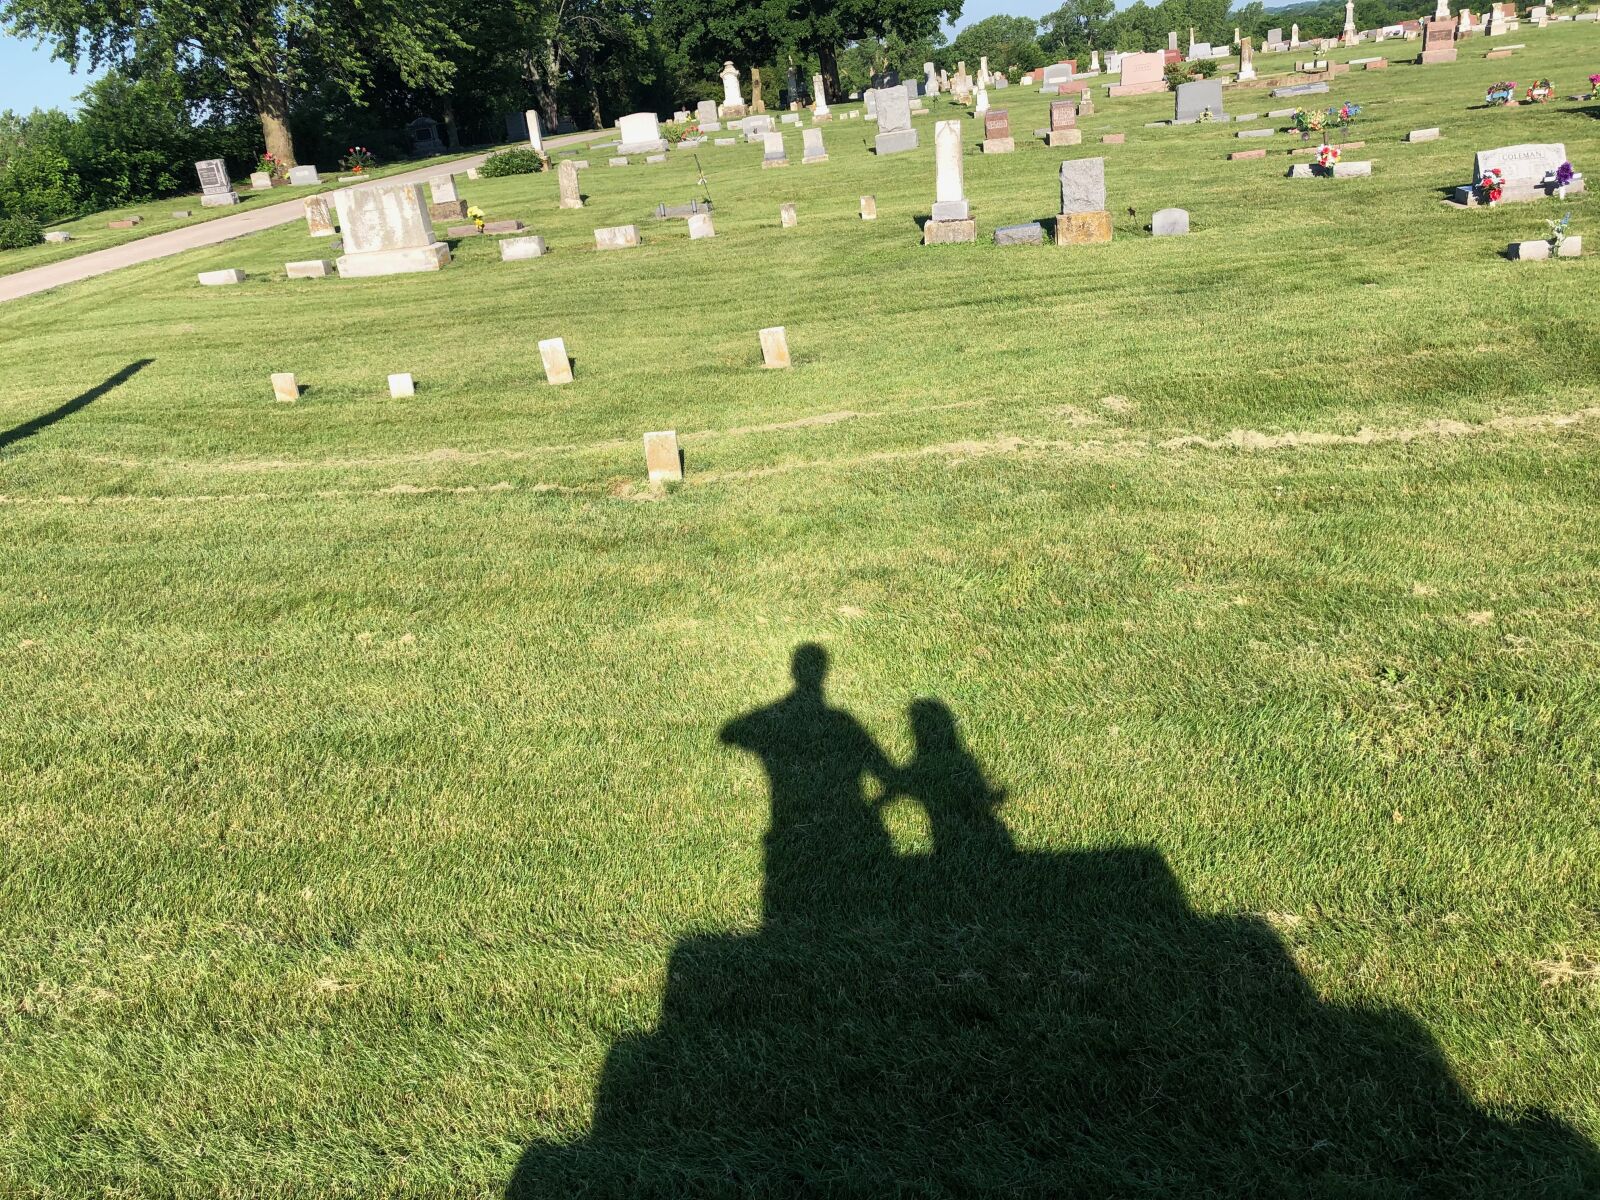 Apple iPhone X + iPhone X back dual camera 4mm f/1.8 sample photo. Cemetery, shadow, grave photography